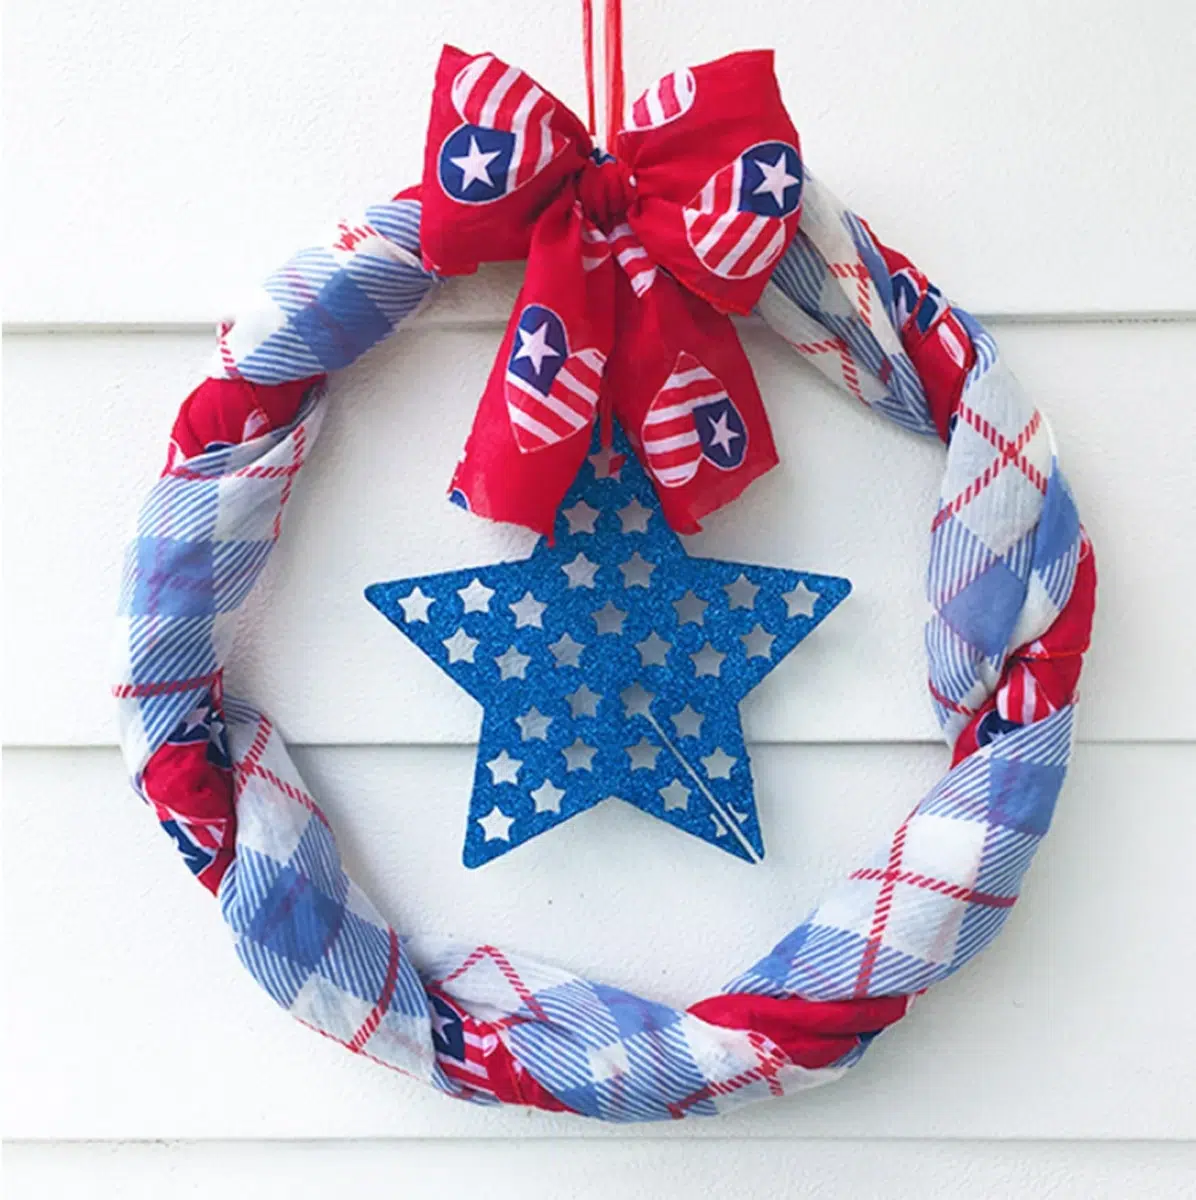 Patriotic Fourth of July wreaths featuring red, white, and blue fabrics with a star centerpiece and bow, likely for American holiday decoration.